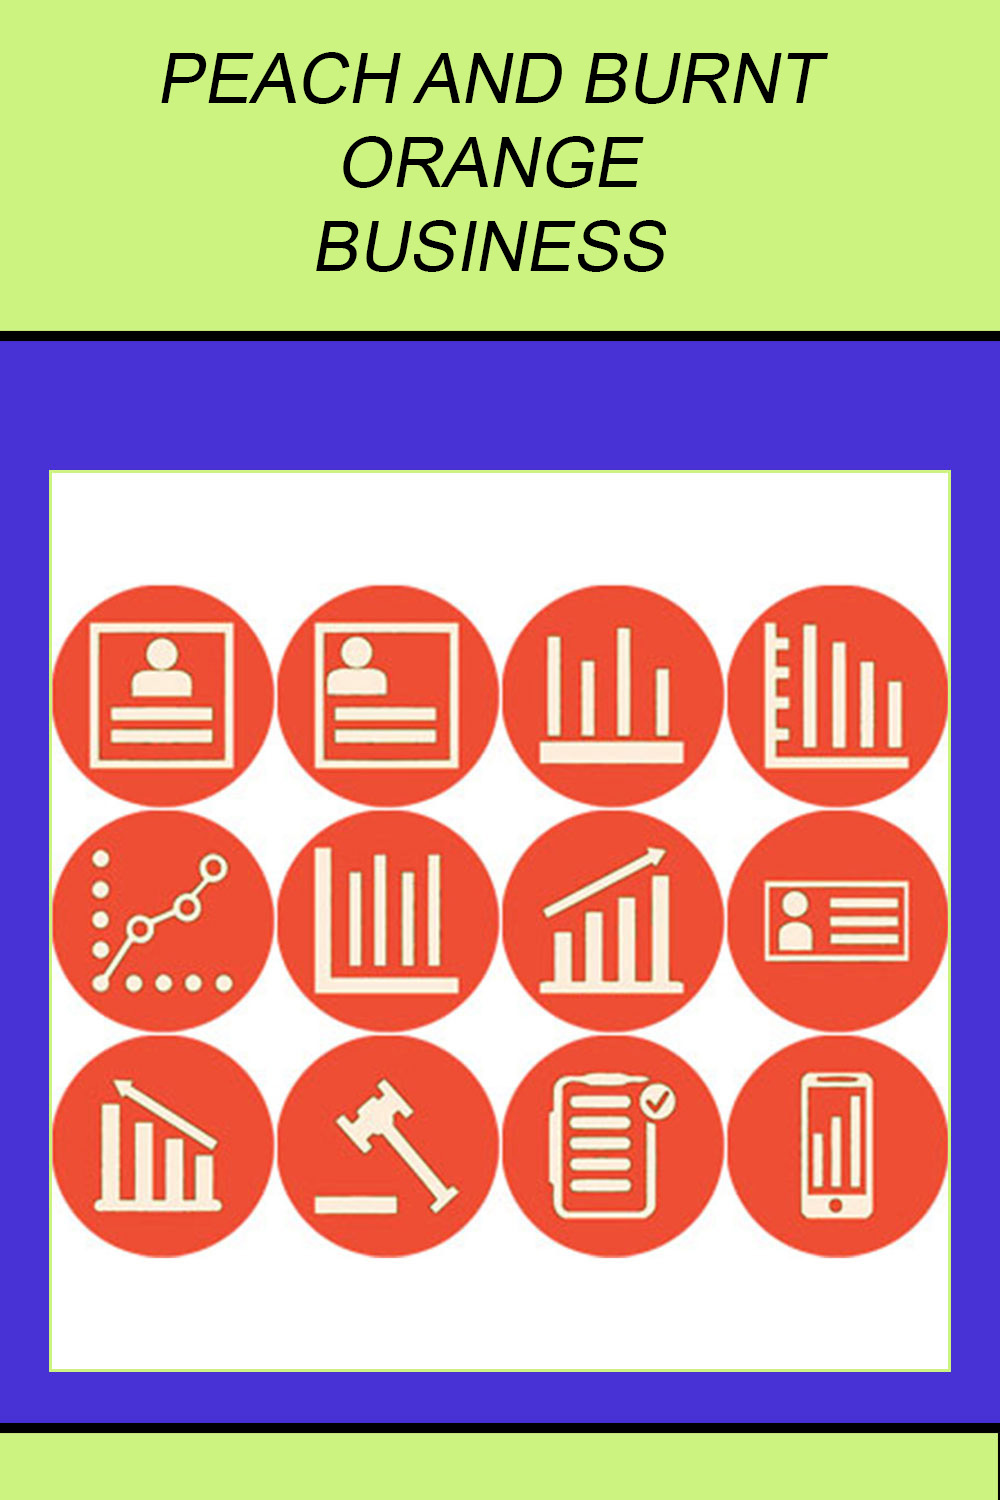 PEACH AND BURNT ORANGE BUSINESS ROUND ICONS pinterest preview image.